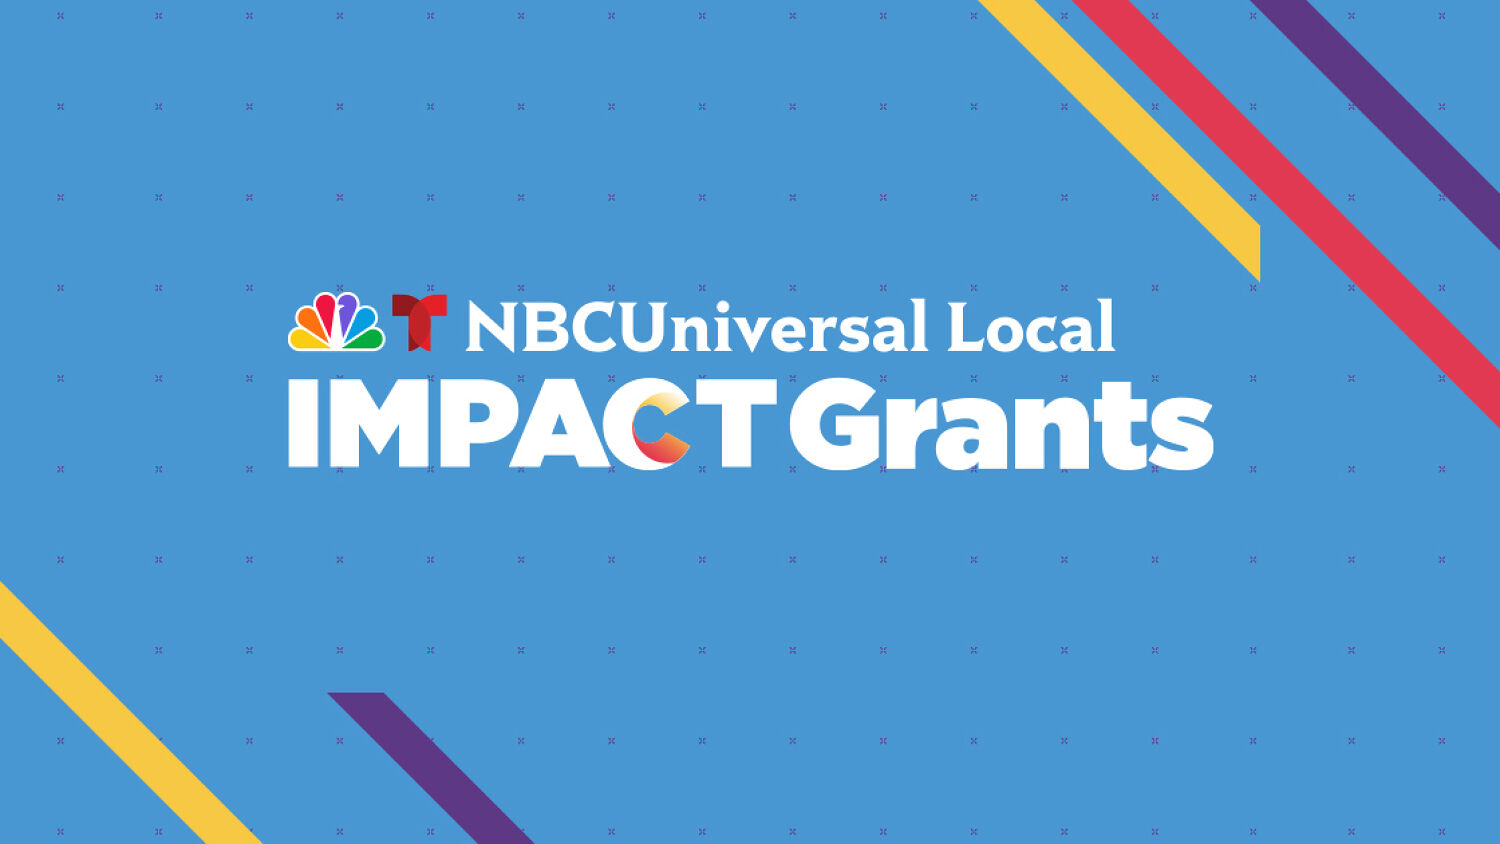 Comcast NBCUniversal to Award $225,000 in Grants to Local Nonprofits in the Bay Area